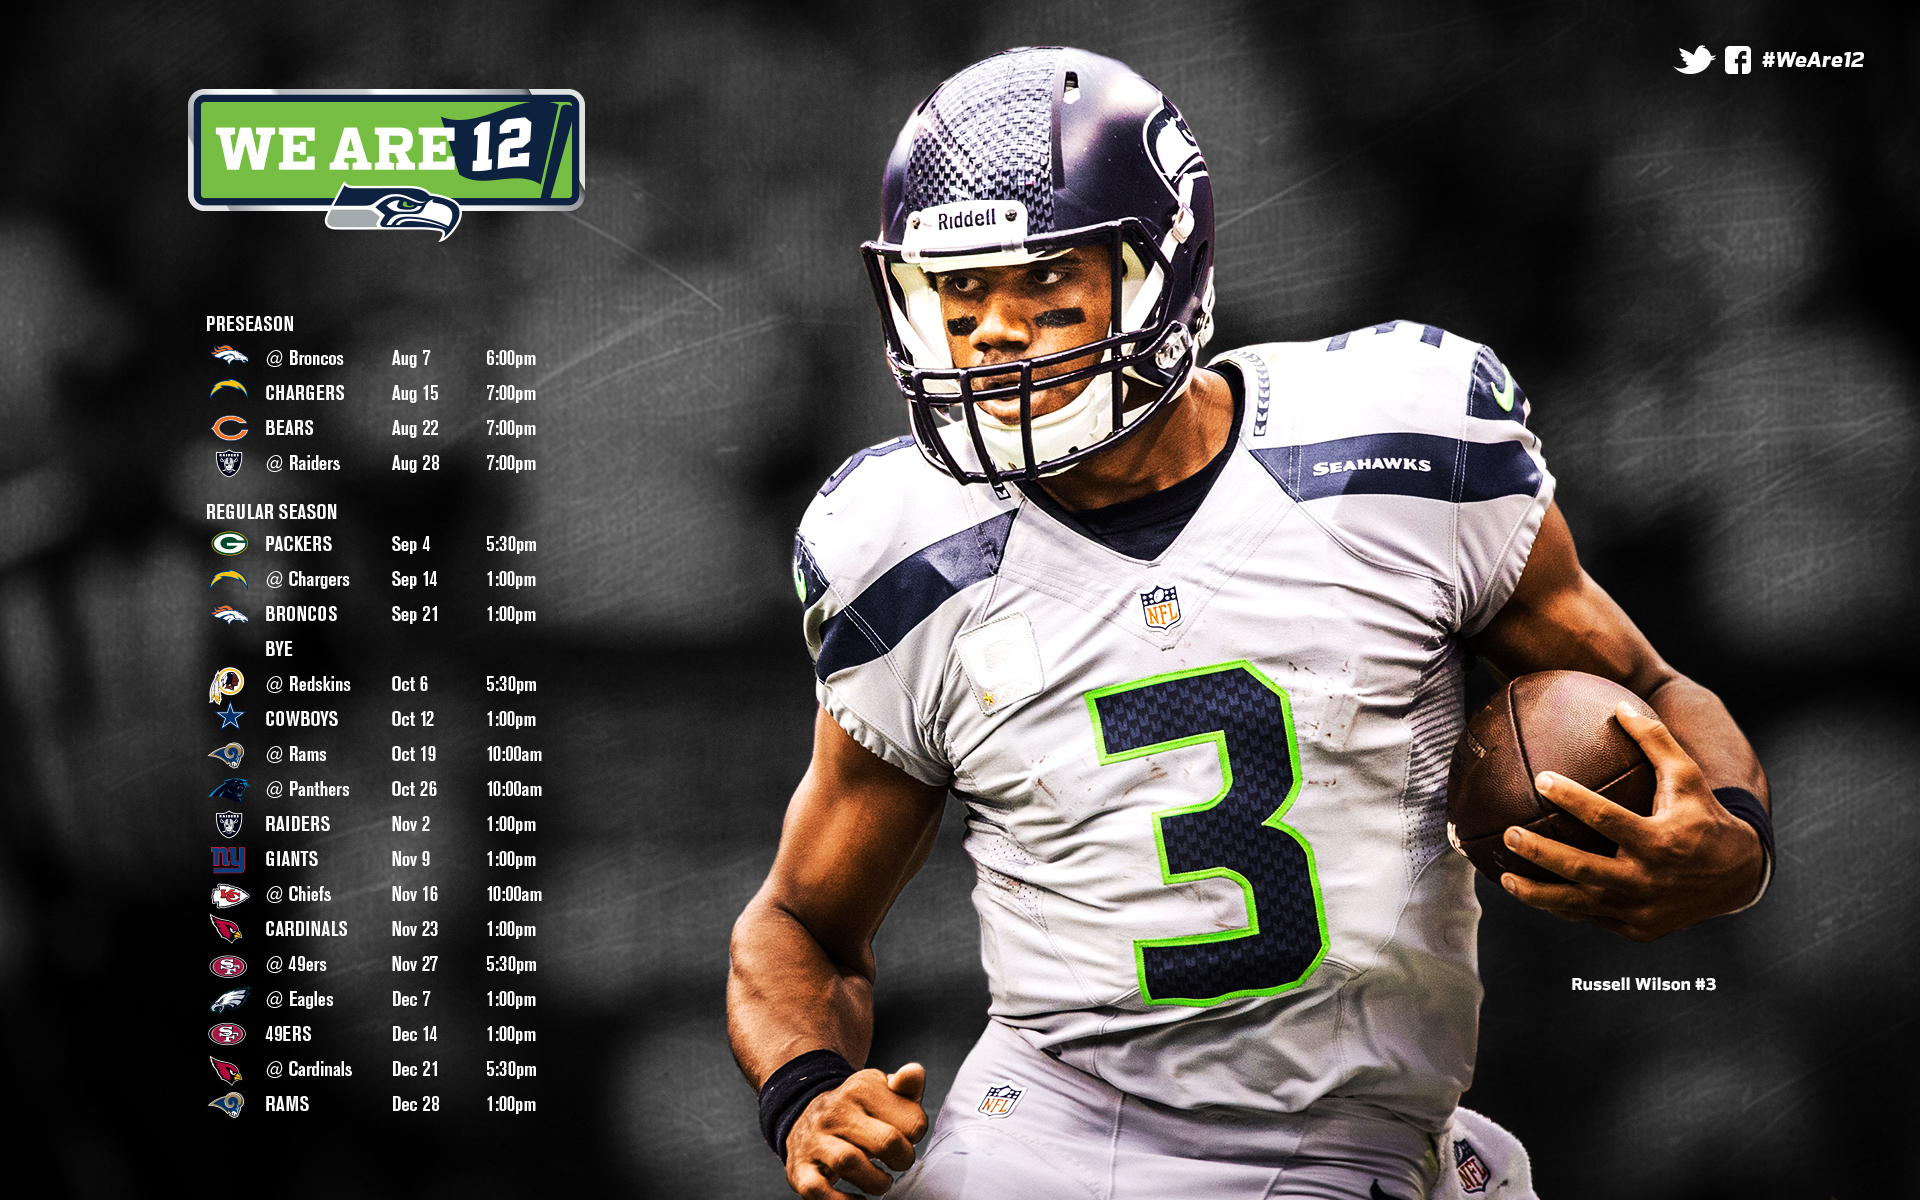 Russell Wilson HD Wallpaper Background Image Id